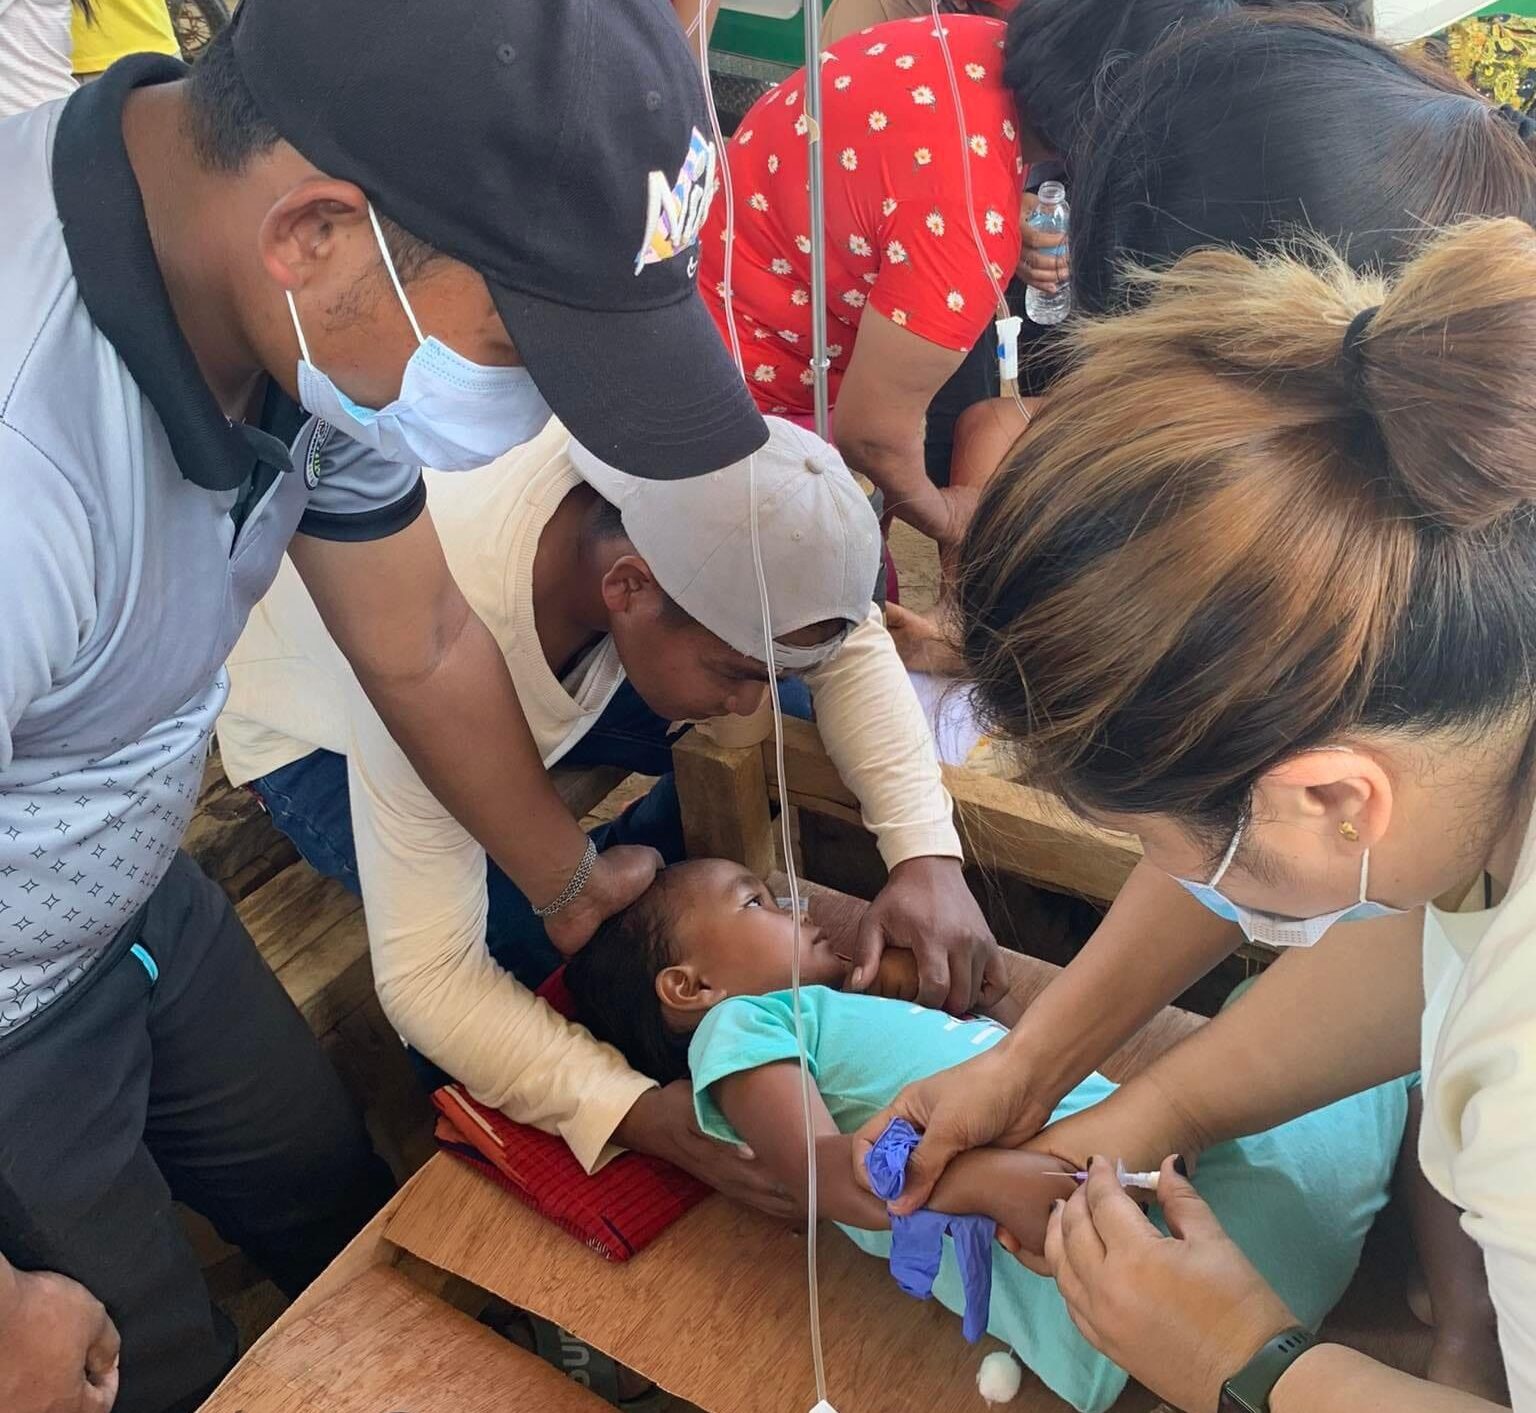 Health workers from Rural Health Unit of the South Upi local government take care of a child who felt sick after attending a tribal wedding on Thursday.